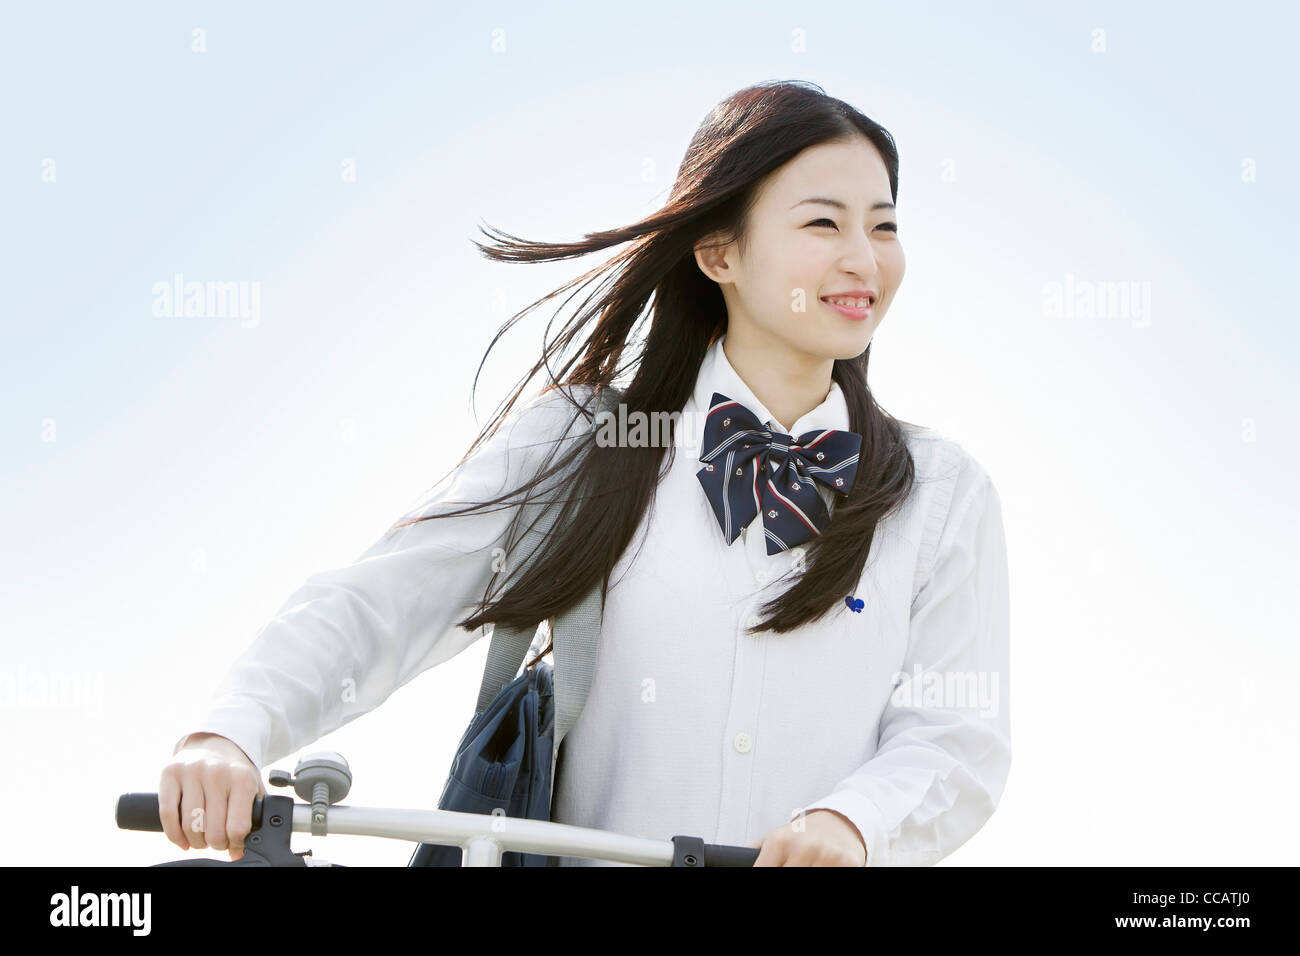 High school girl and a bicycle Stock Photo